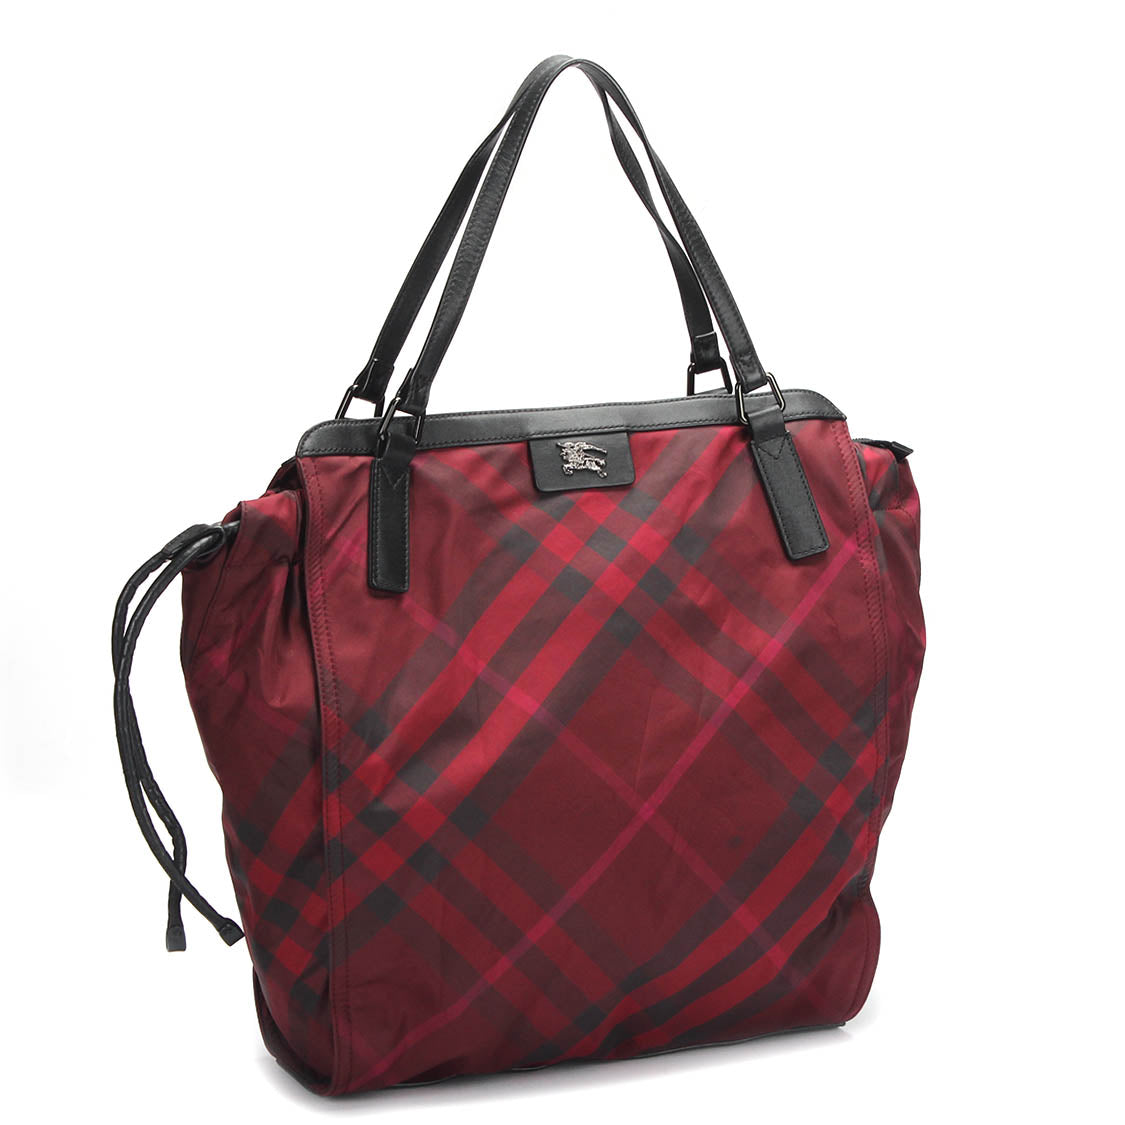 Burberry Plaid Buckleigh Nylon Tote Bag Canvas Tote Bag in Excellent condition